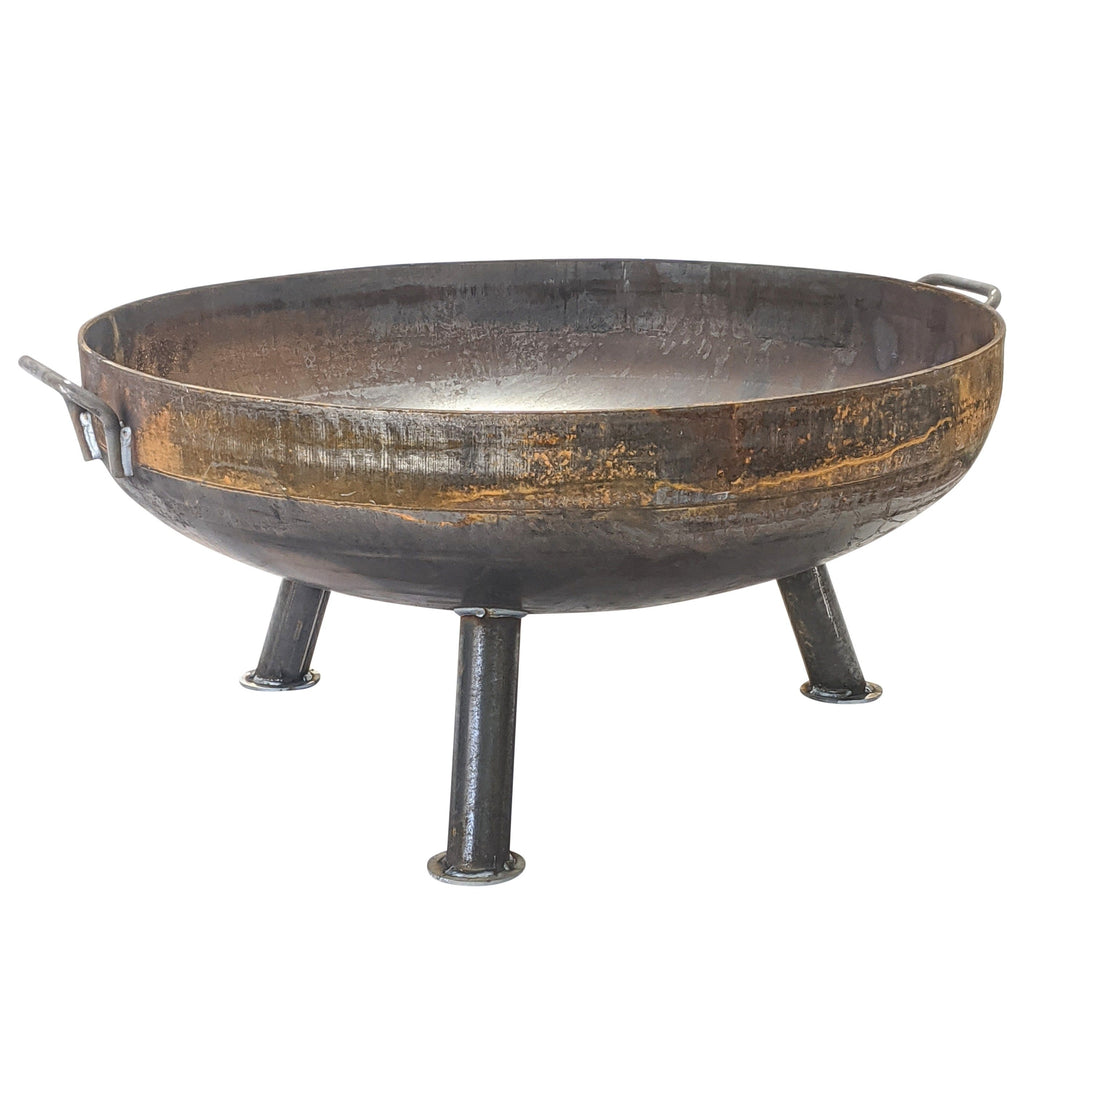 Heavy Duty Fire Pit | 30" | Local Pickup Only